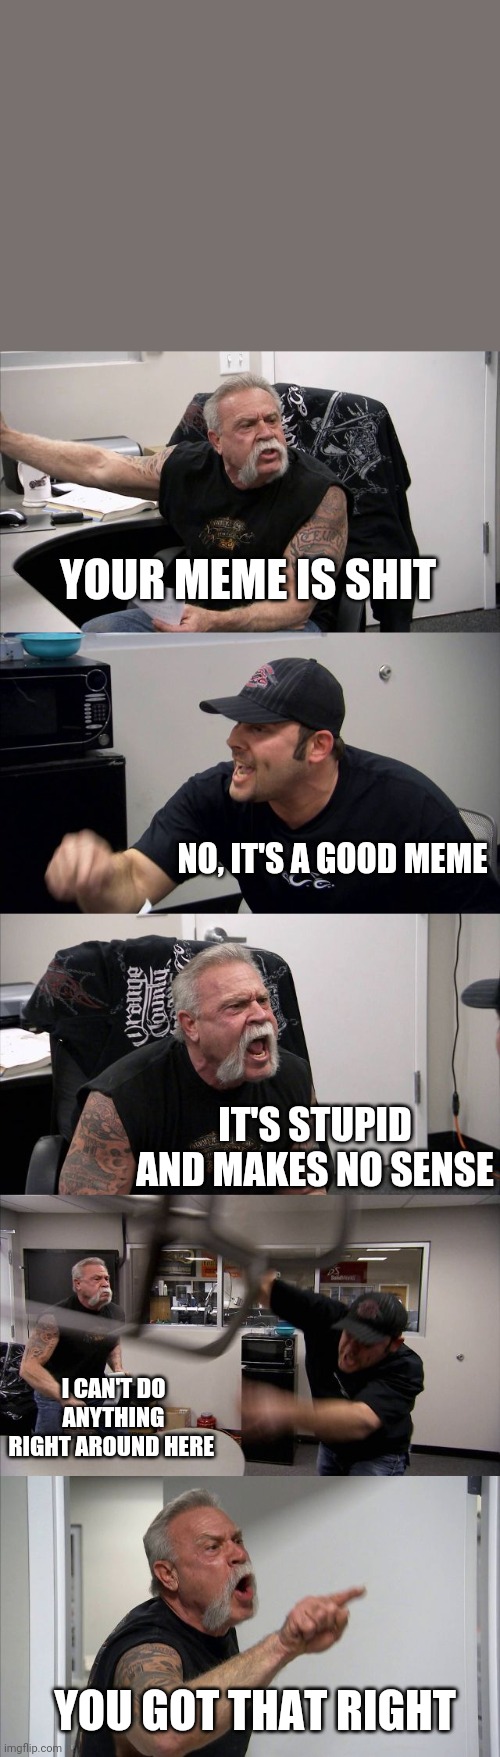 American Chopper Argument | YOUR MEME IS SHIT; NO, IT'S A GOOD MEME; IT'S STUPID AND MAKES NO SENSE; I CAN'T DO ANYTHING RIGHT AROUND HERE; YOU GOT THAT RIGHT | image tagged in memes,american chopper argument | made w/ Imgflip meme maker